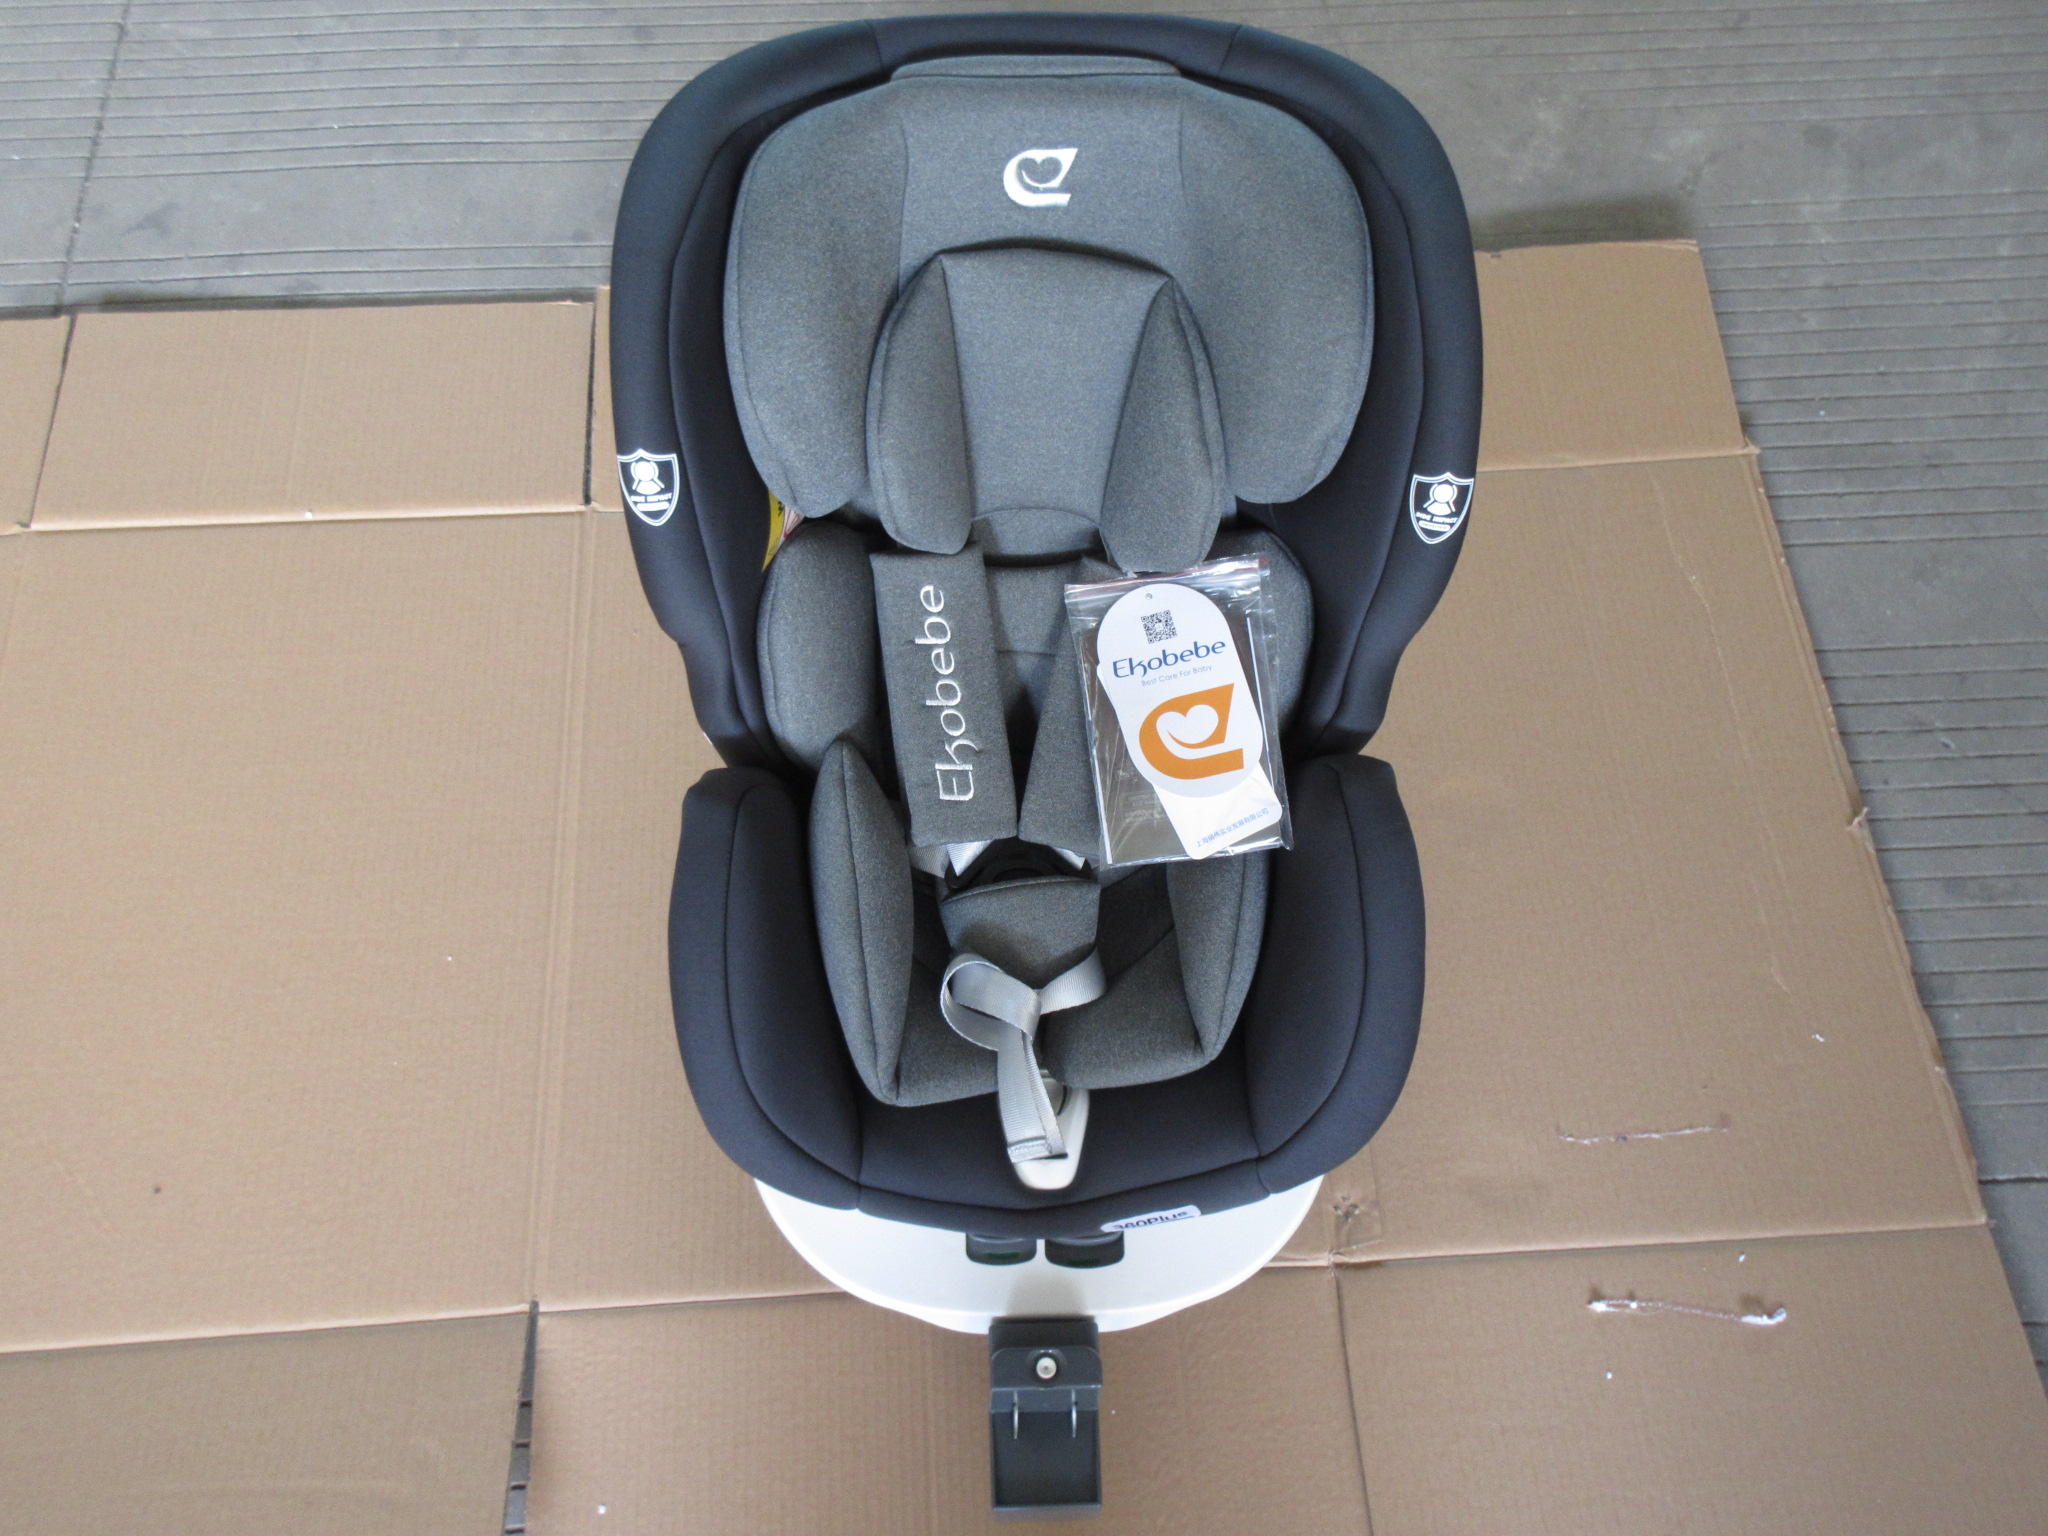 China Mianyang Child Safety Seat Inspection Service AQL And Product Inspection Alibaba Loading Supervision Third Party Inspection Service